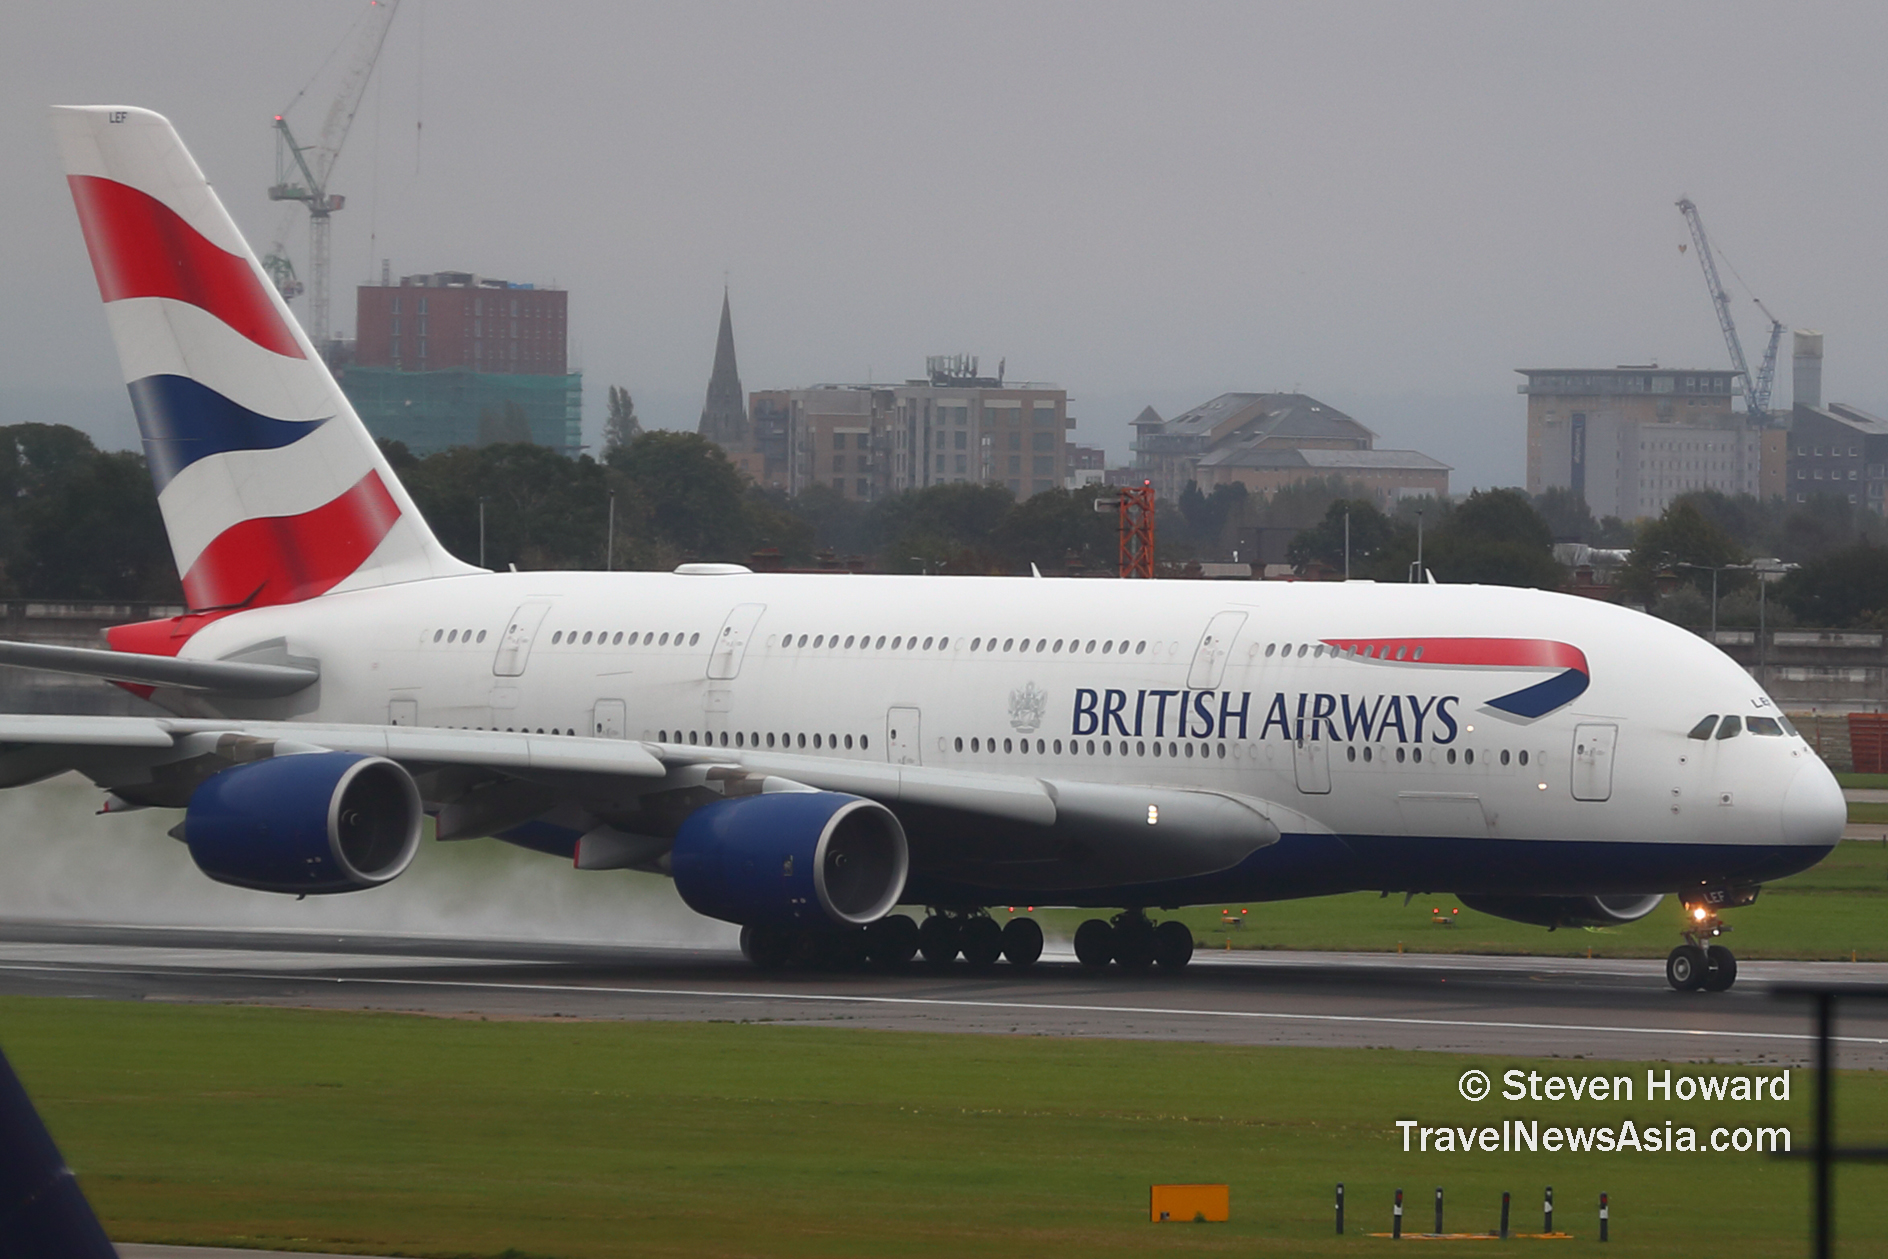 British Airways A380 reg: G-XLEF. Picture by Steven Howard of TravelNewsAsia.com Click to enlarge.